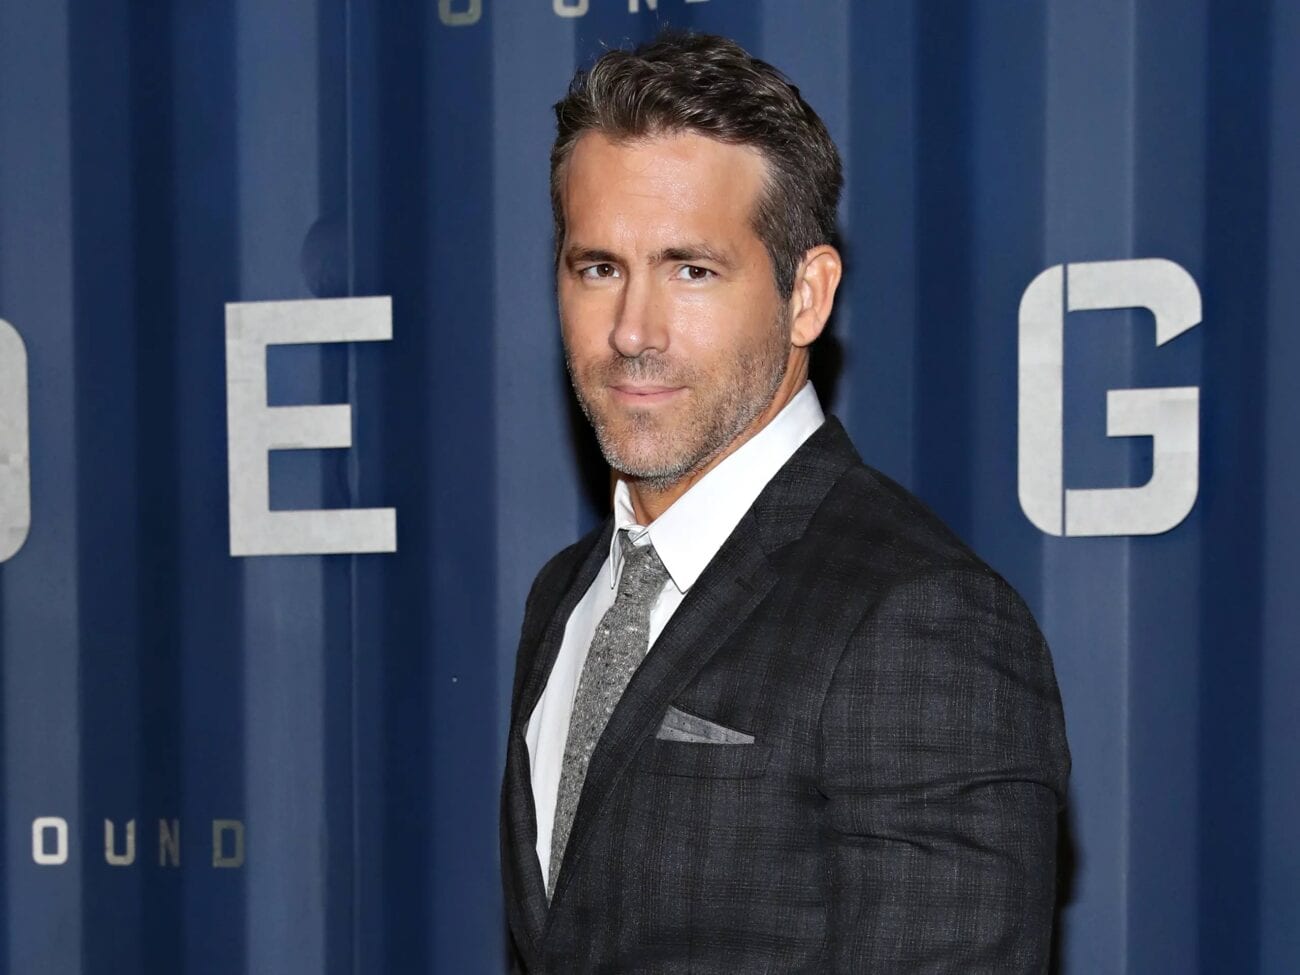 It looks like TikTok may have a new addition. Take a look at how Ryan Reynolds is using the platform to stay in touch with all his young fans.